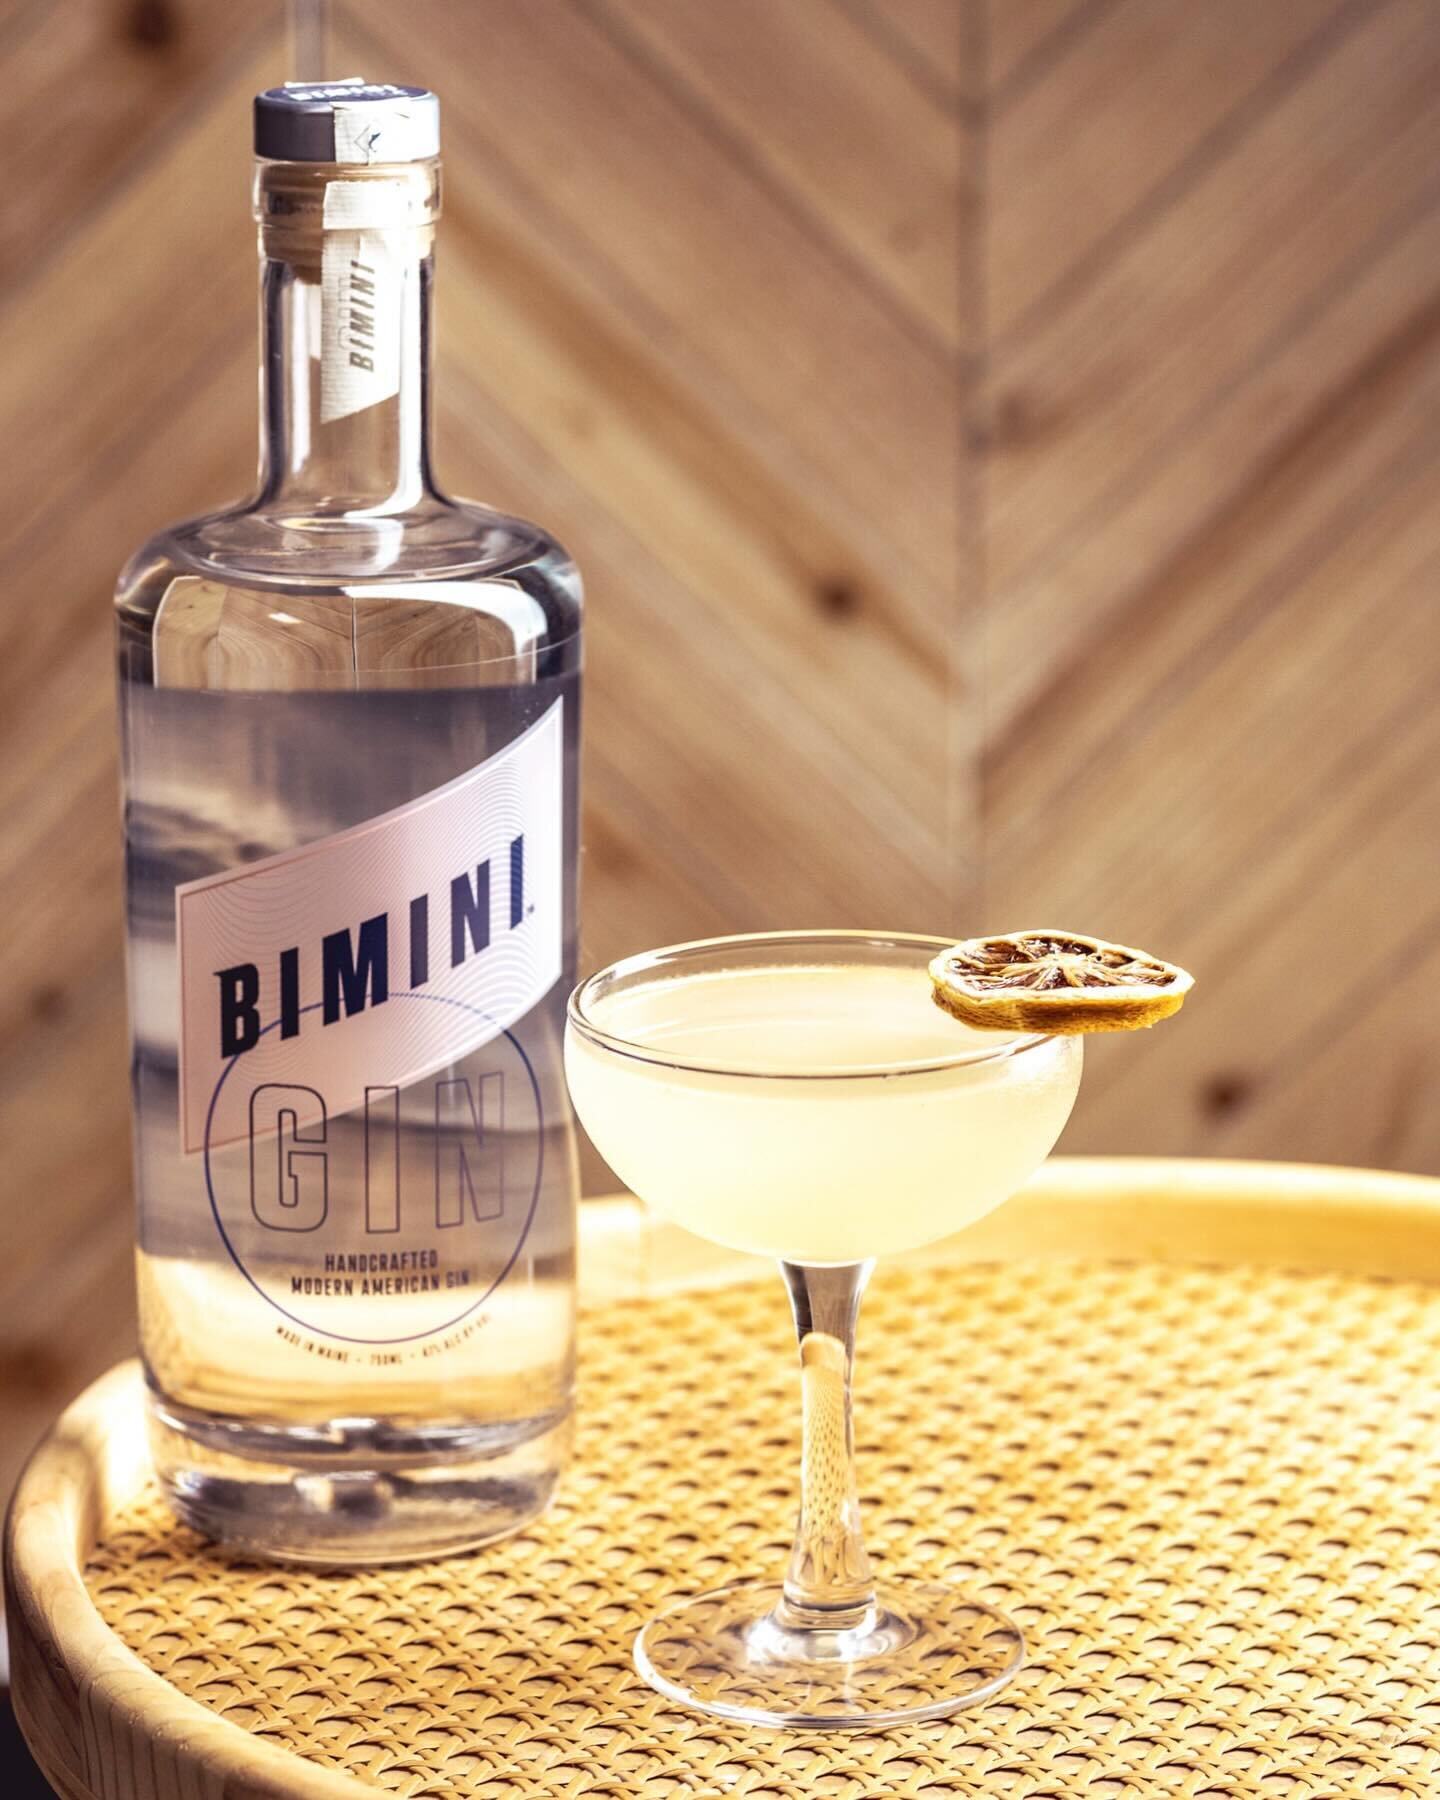 With our summer-inspired botanicals and crisp citrusy flavor, Bimini Gin evokes warm sunny weather all year long! Whether you&rsquo;re snowed-in at the ski lodge or sitting by the pool house, Bimini brings the summer sun to your cocktail.
☀️🍋☀️
#rel